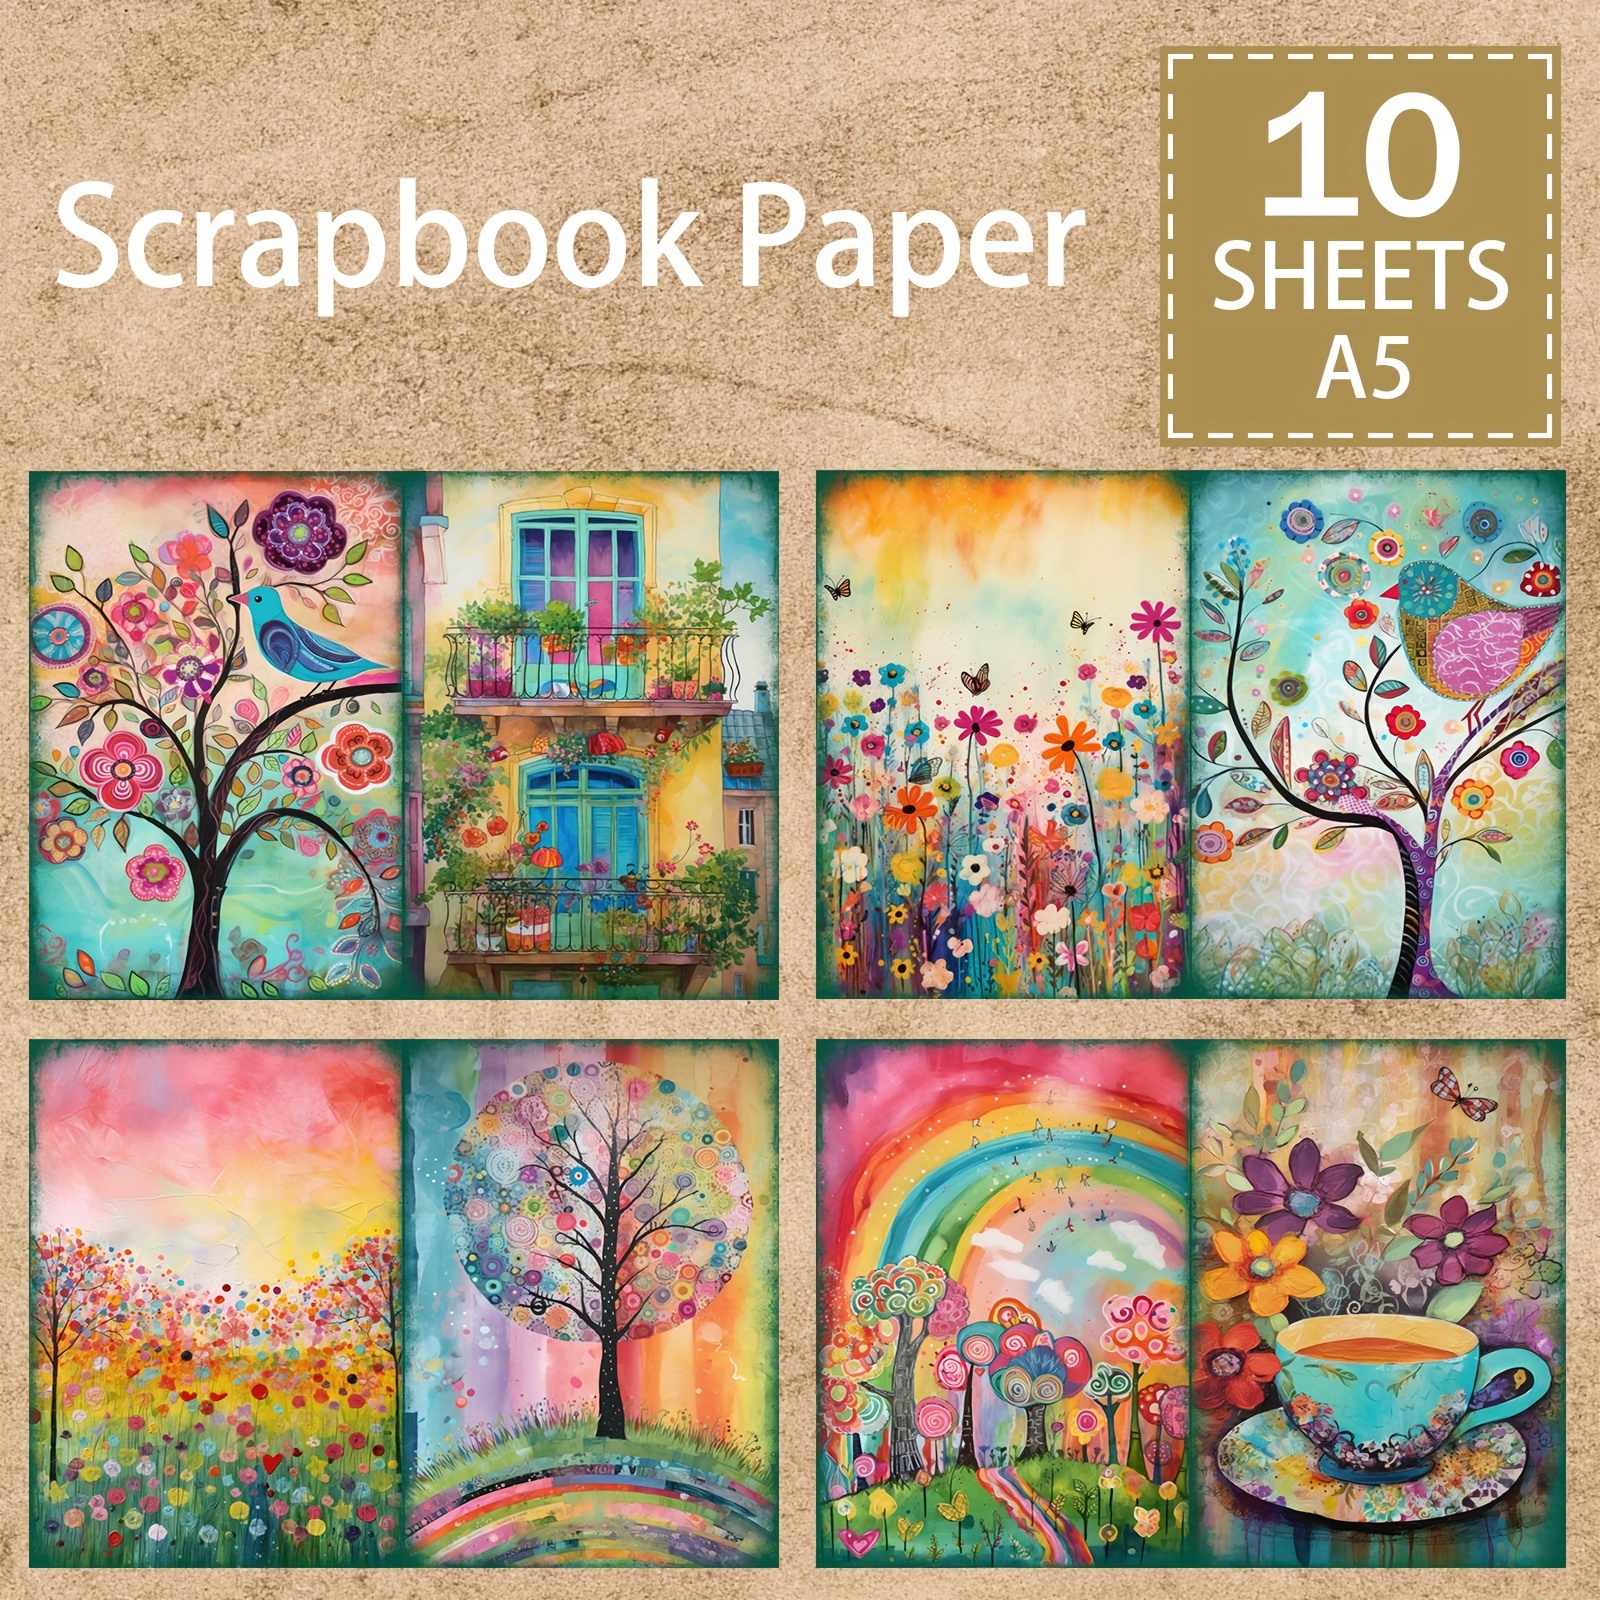 

10 A5 Scrapbook Papers: Vibrant Greeting Cards With Whimsical Artwork - Perfect For Diy Projects And Crafting